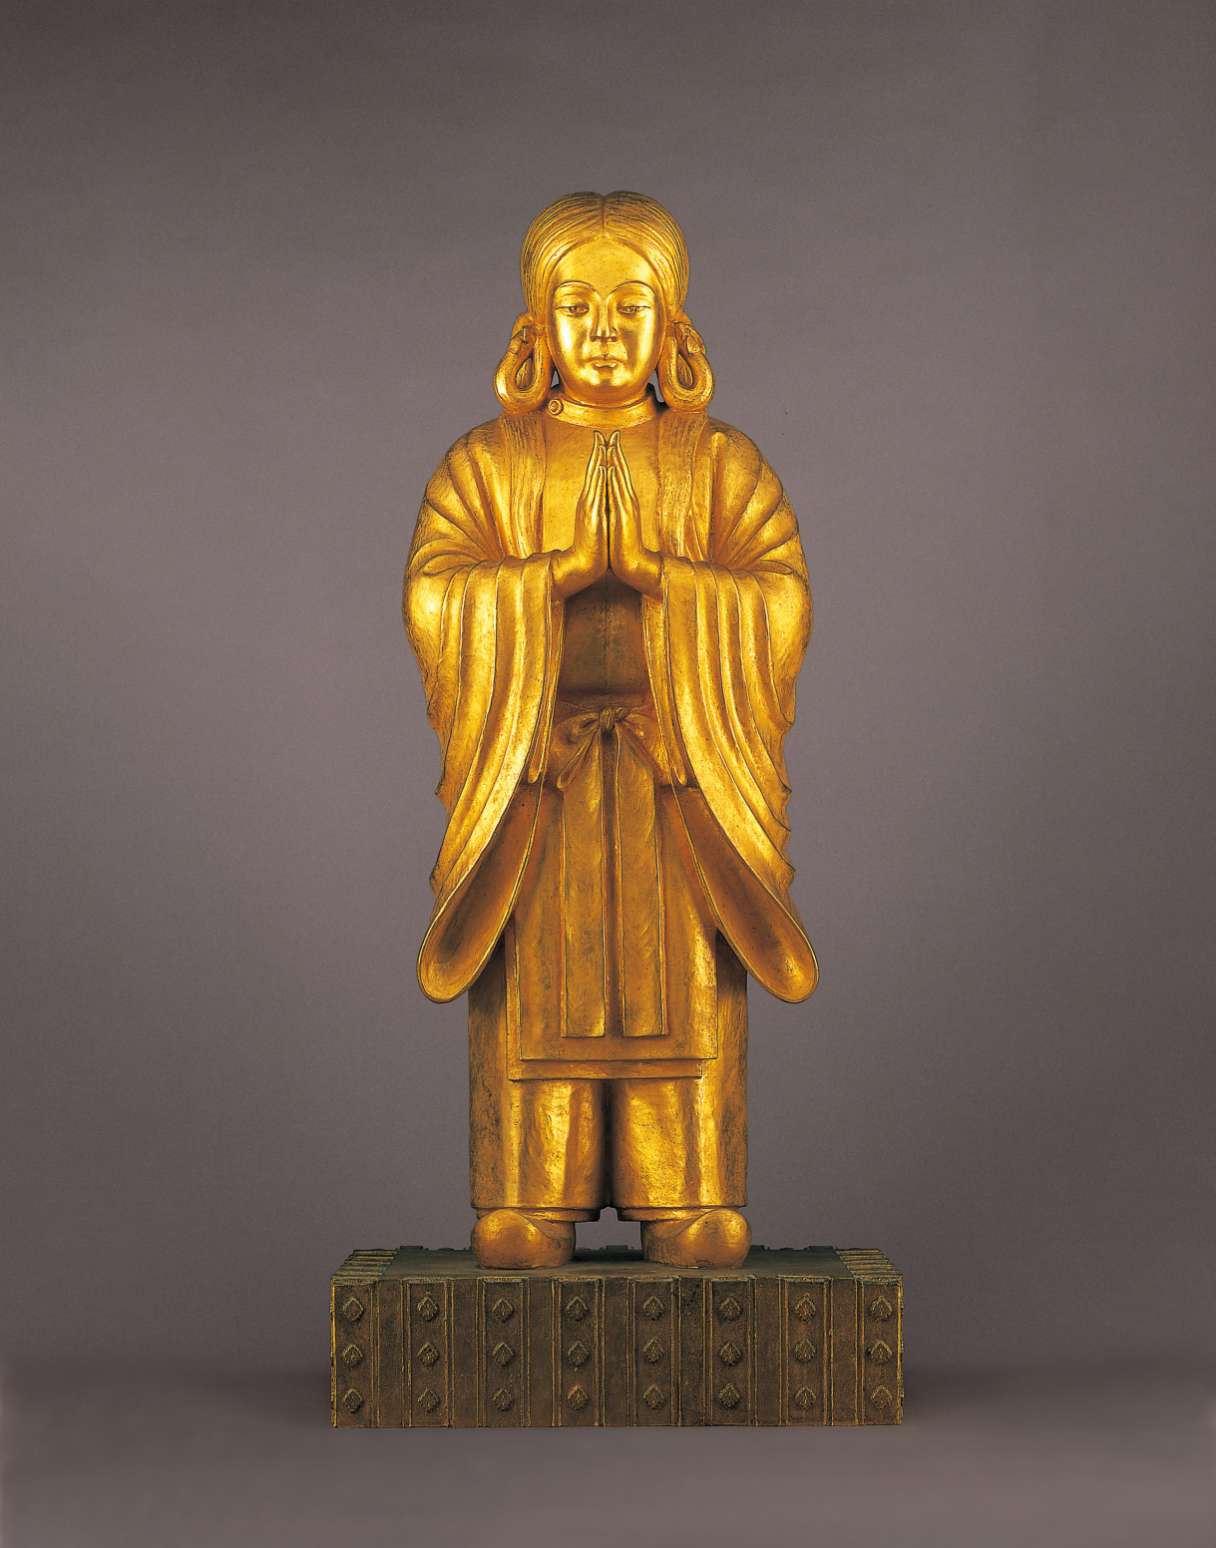 A lustrous, bronze hued statue of a long-haired youth, wearing a kimono with flowing sleeves, an apron, stiff pants, and shoes with upturned toes stands with hands in prayer atop a decorated pedestal.